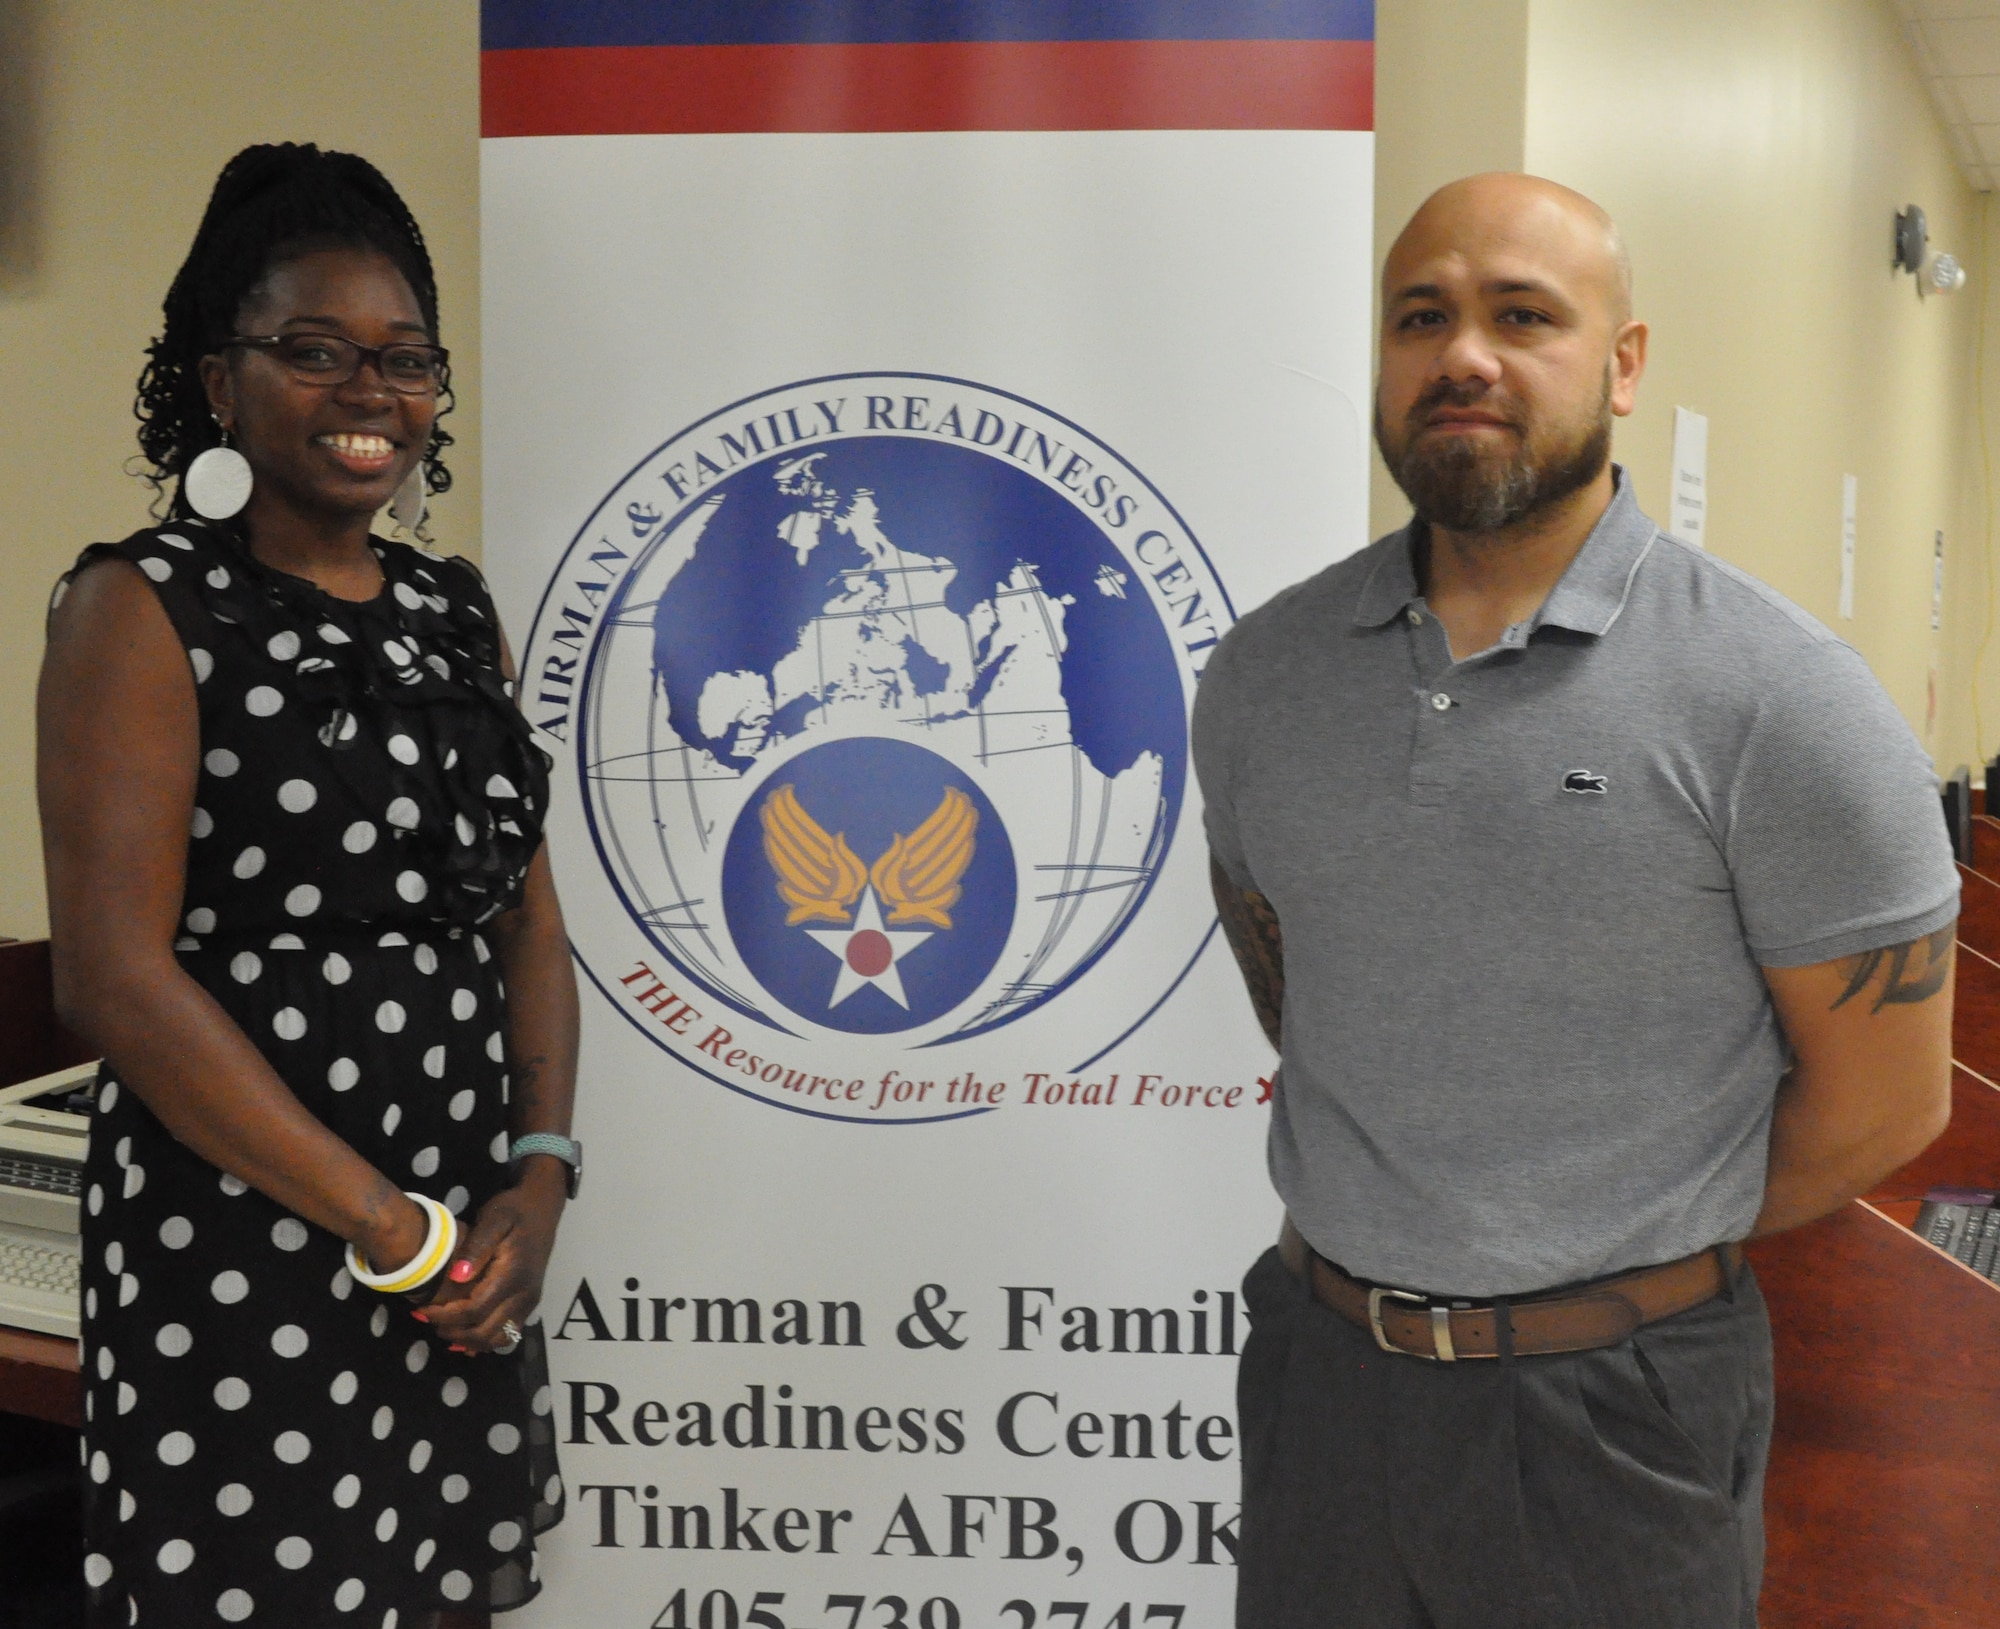 Community Readiness Specialist Nakisha Hall and Community Readiness Consultant Robert Duwel work with the Airman & Family Readiness Center to meet the needs of Tinker personnel and their families. You can reach the A&FRC at 739-2747. (U.S. Air Force photo/Megan Prather)